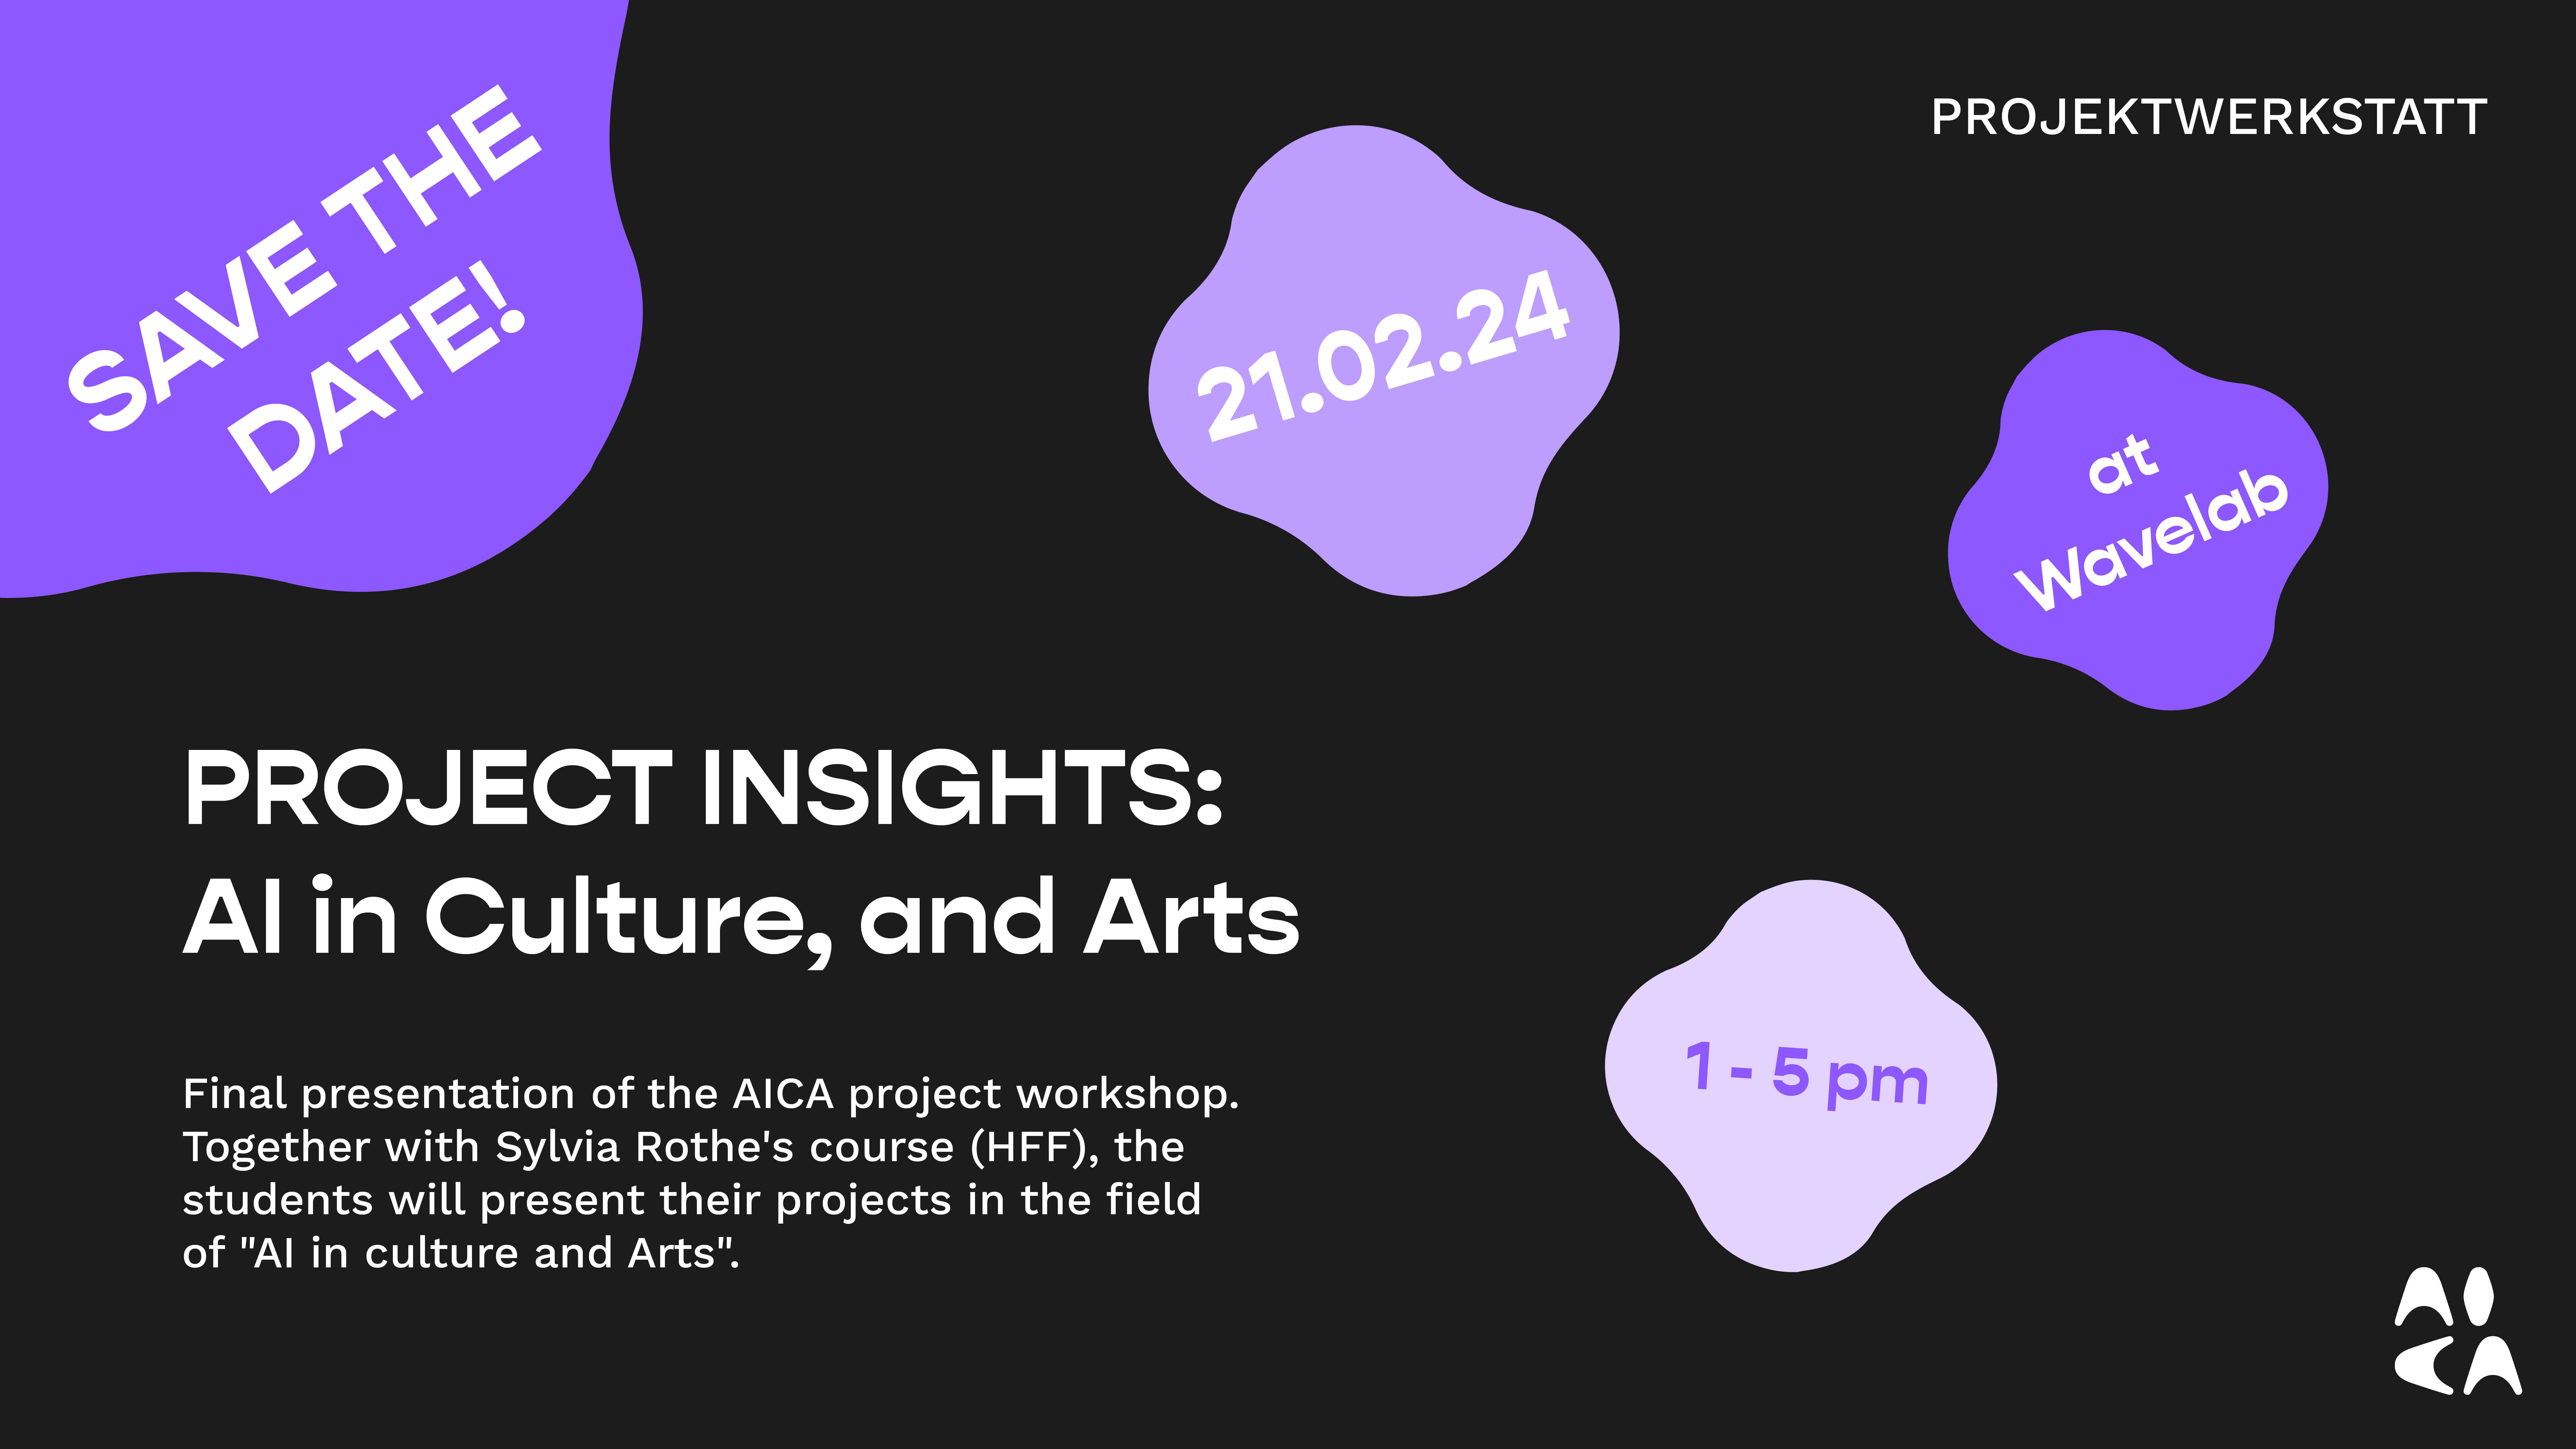 Flyer about the final event on AI in Culture and arts